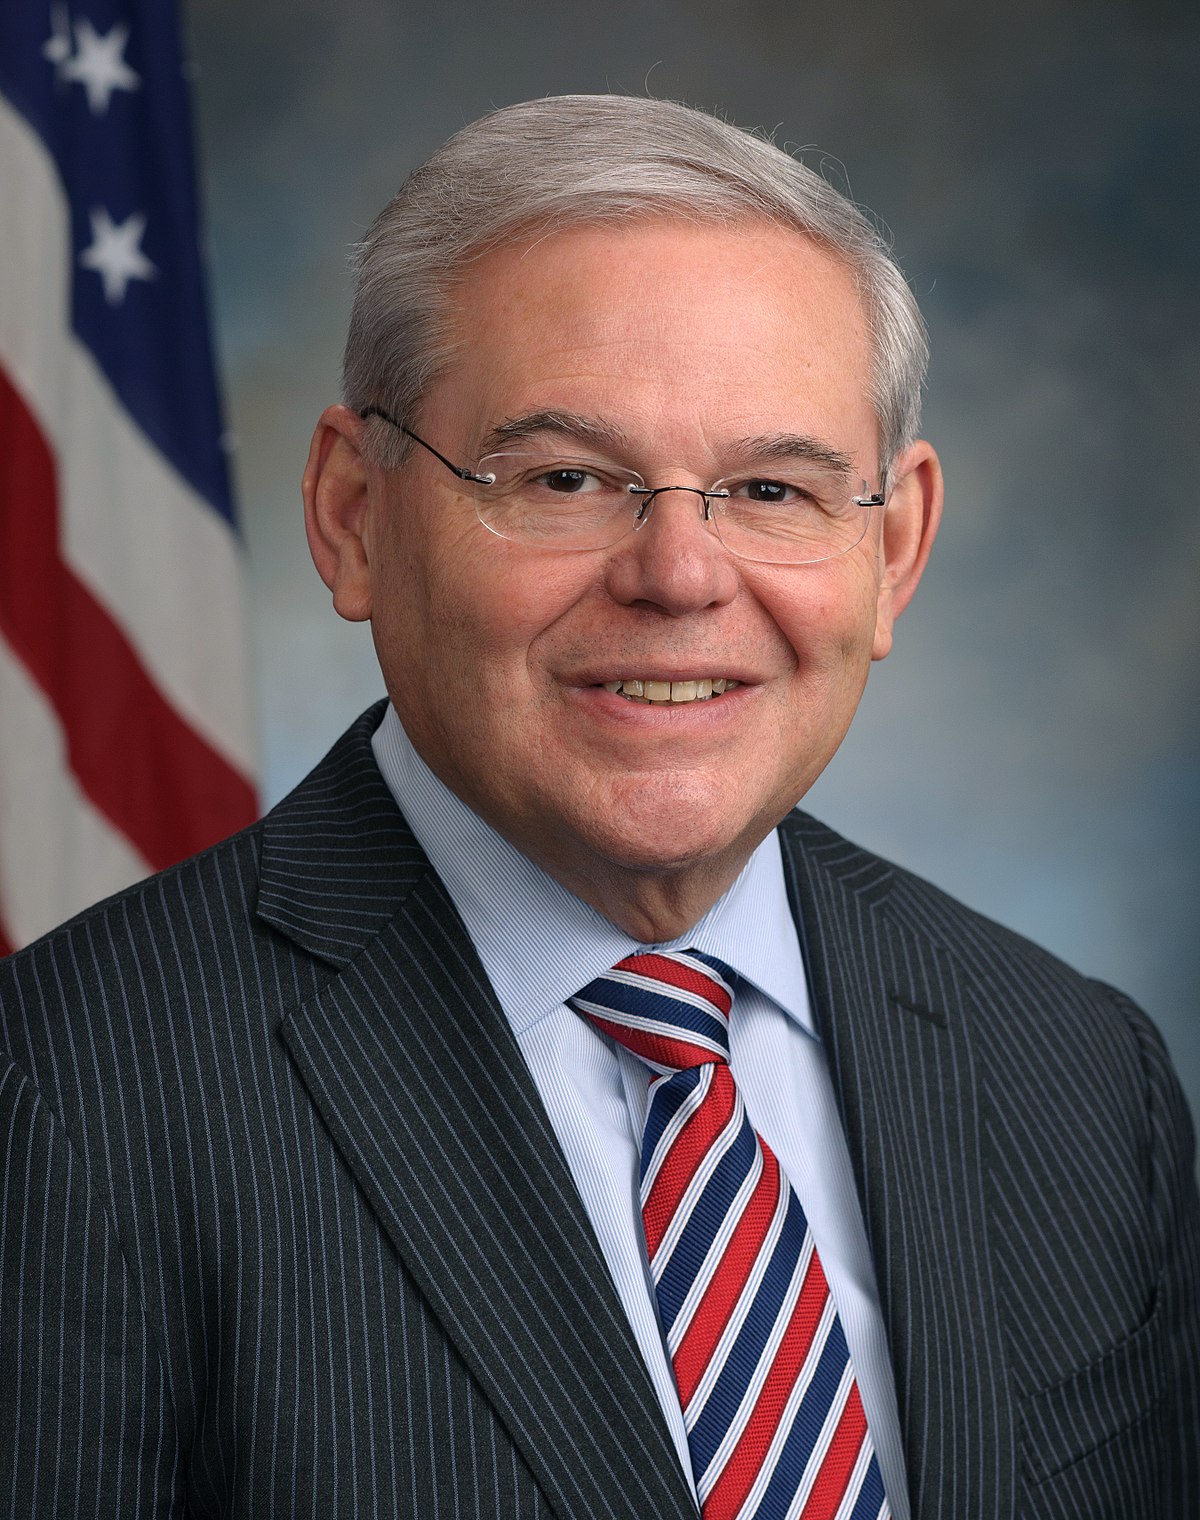 US Senator Menendez charged with bribery, steps down from Senate committee role